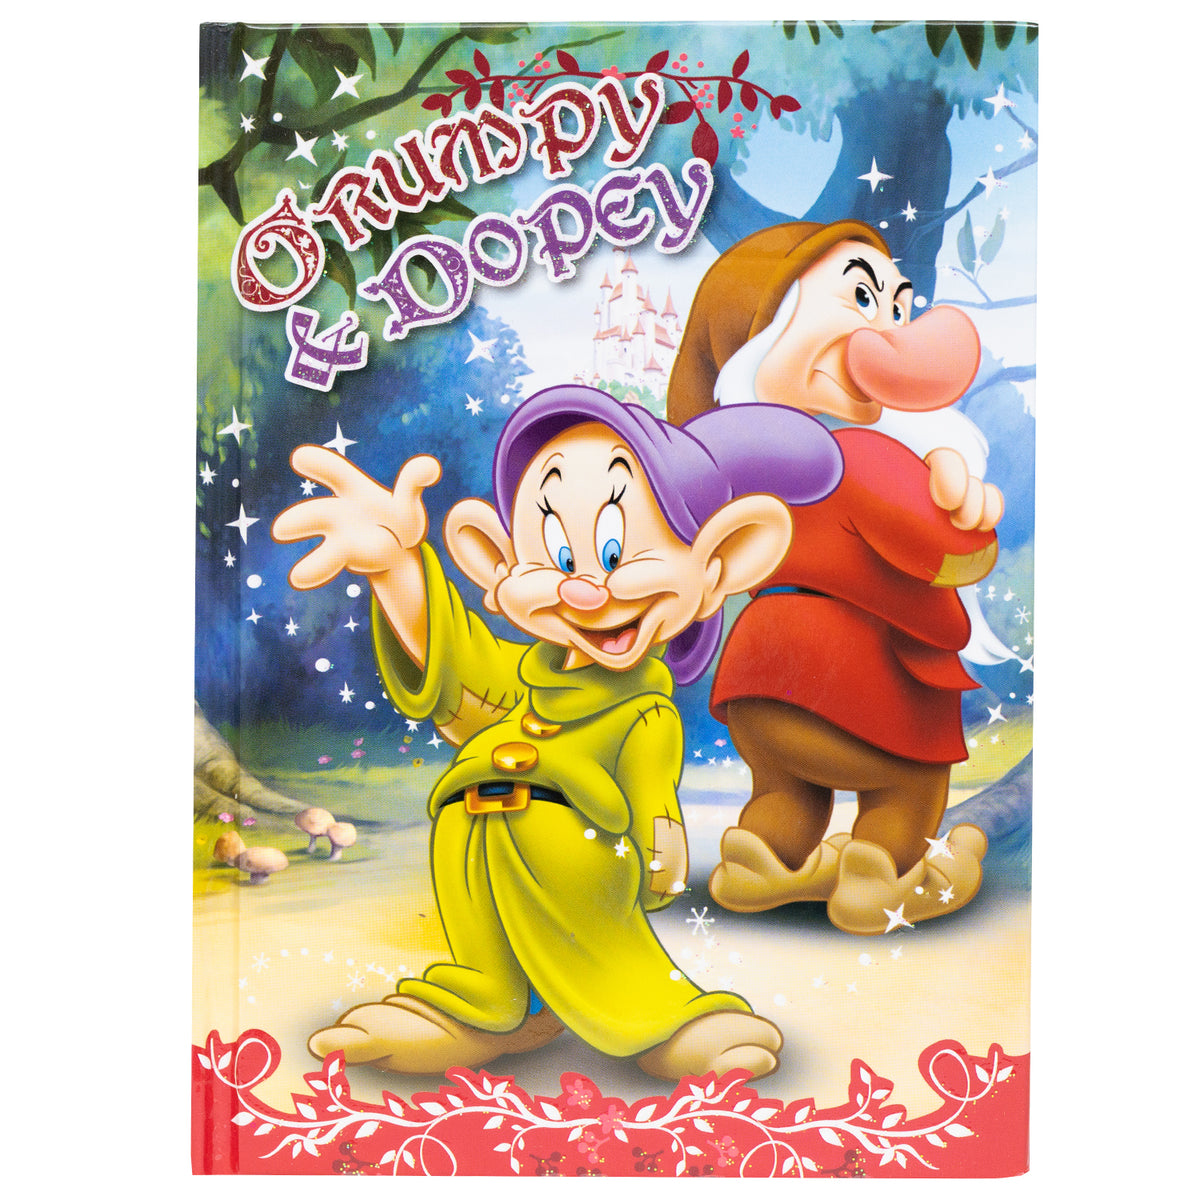 Disney Dopey and Grumpy Personalized Stationery Journal/Notebook